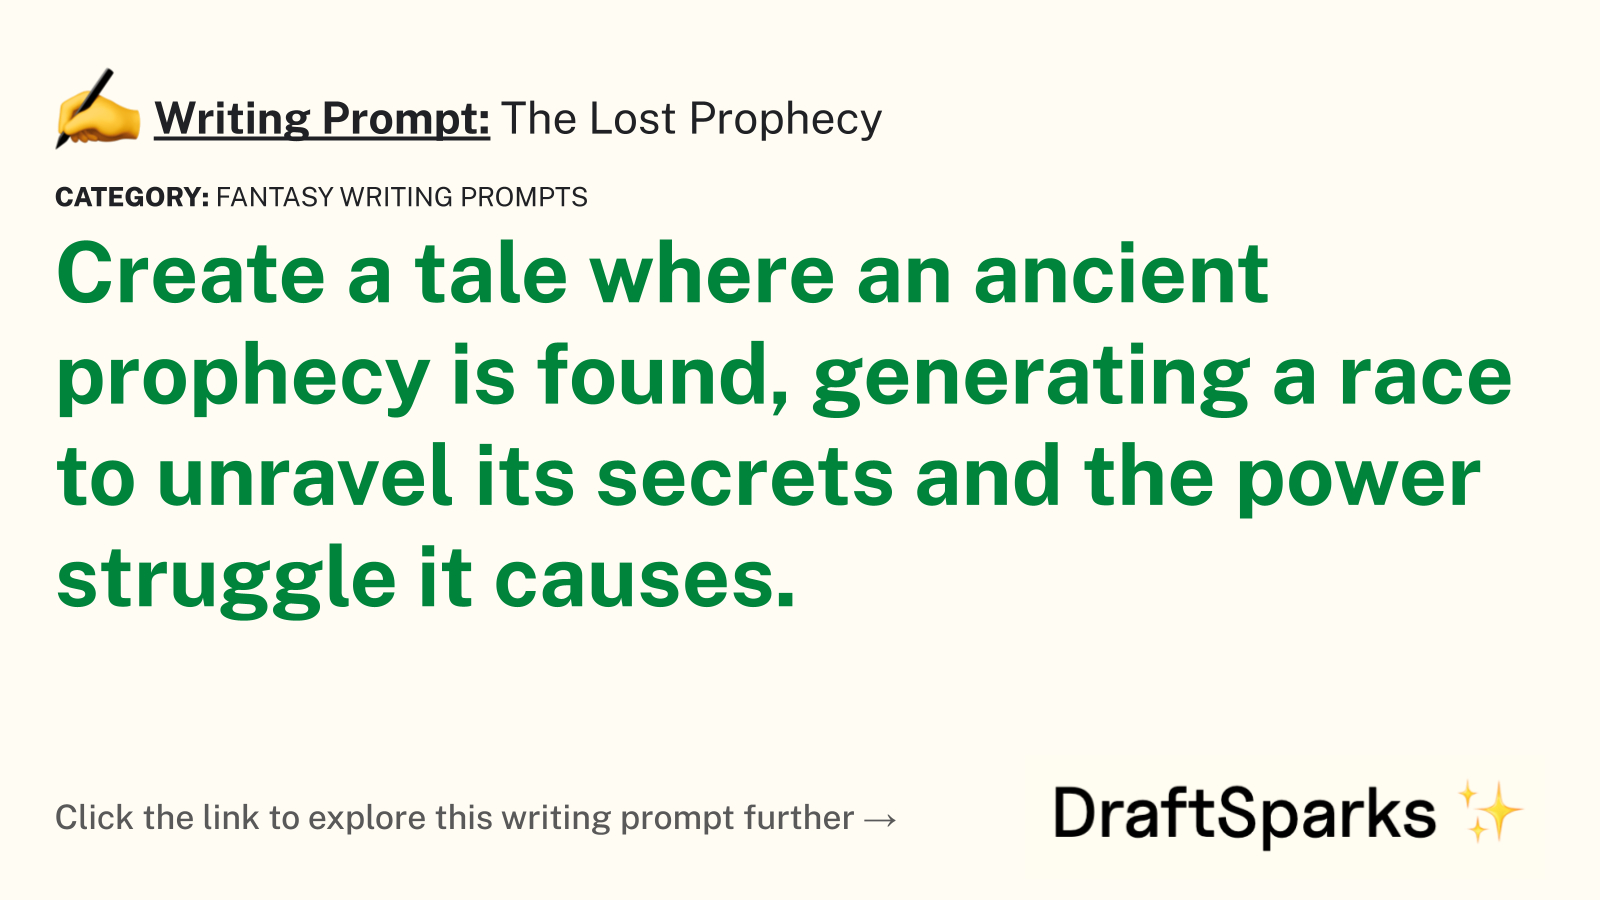 The Lost Prophecy